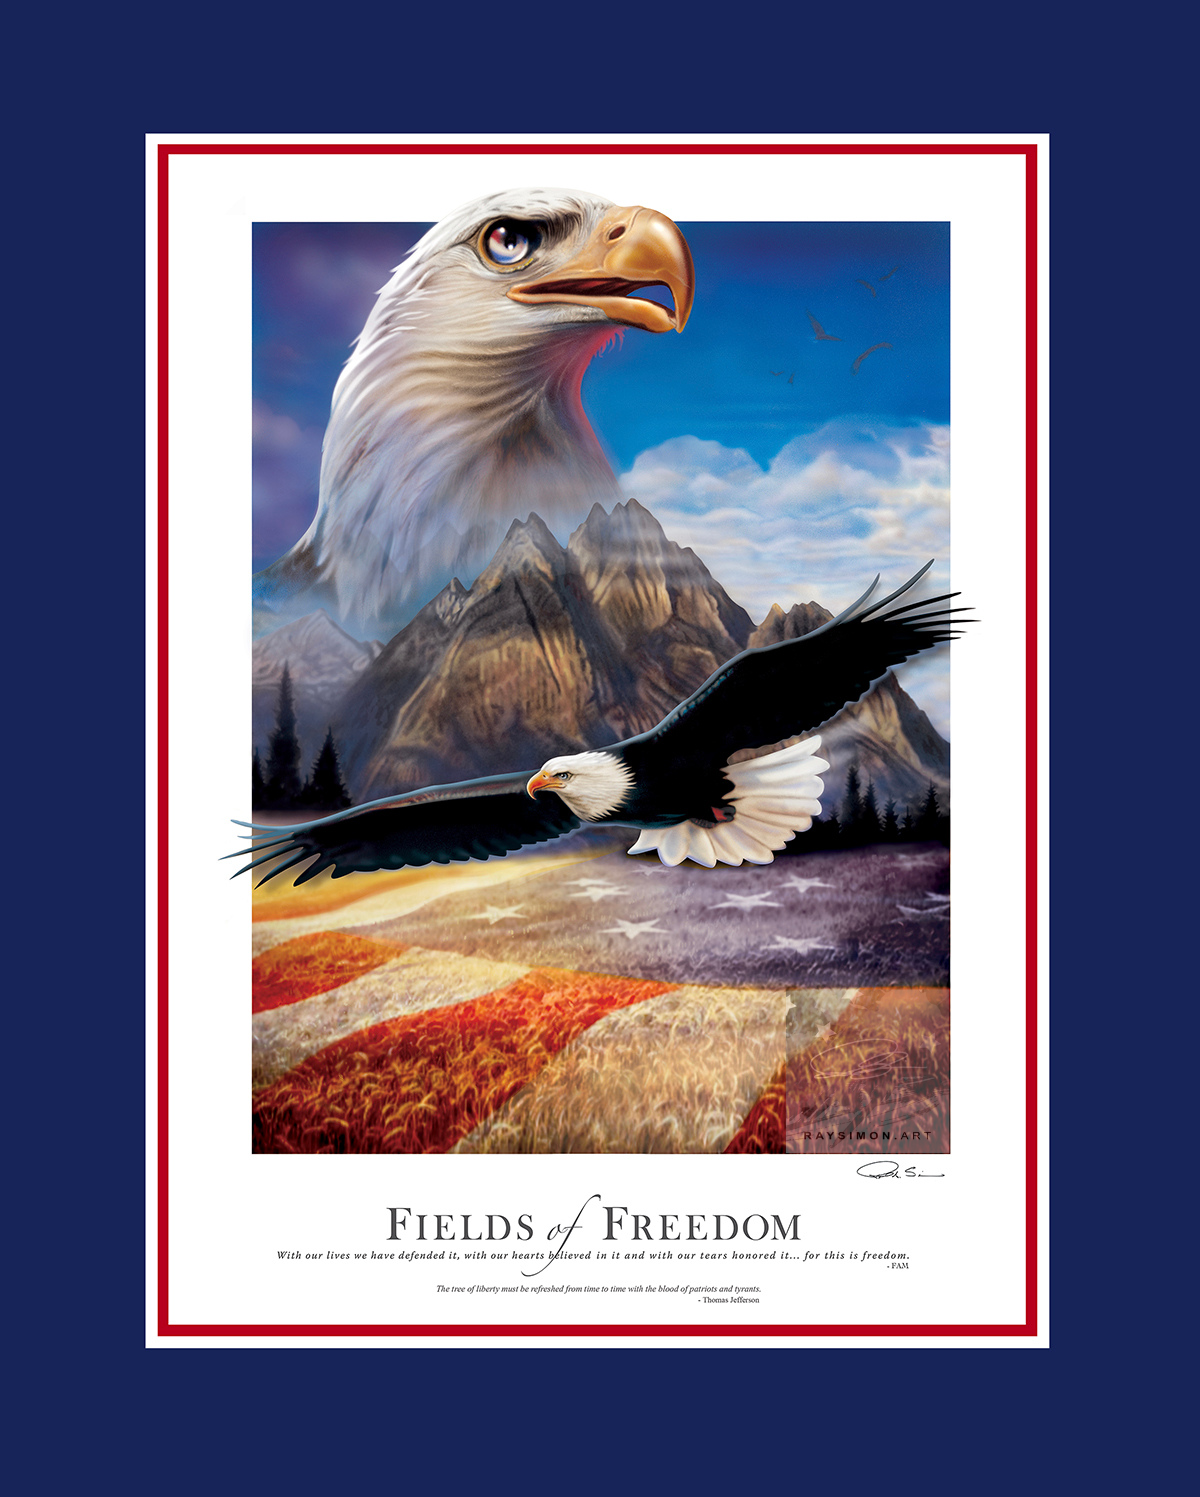 American Bald Eagle Painting - 'Fields of Freedom'